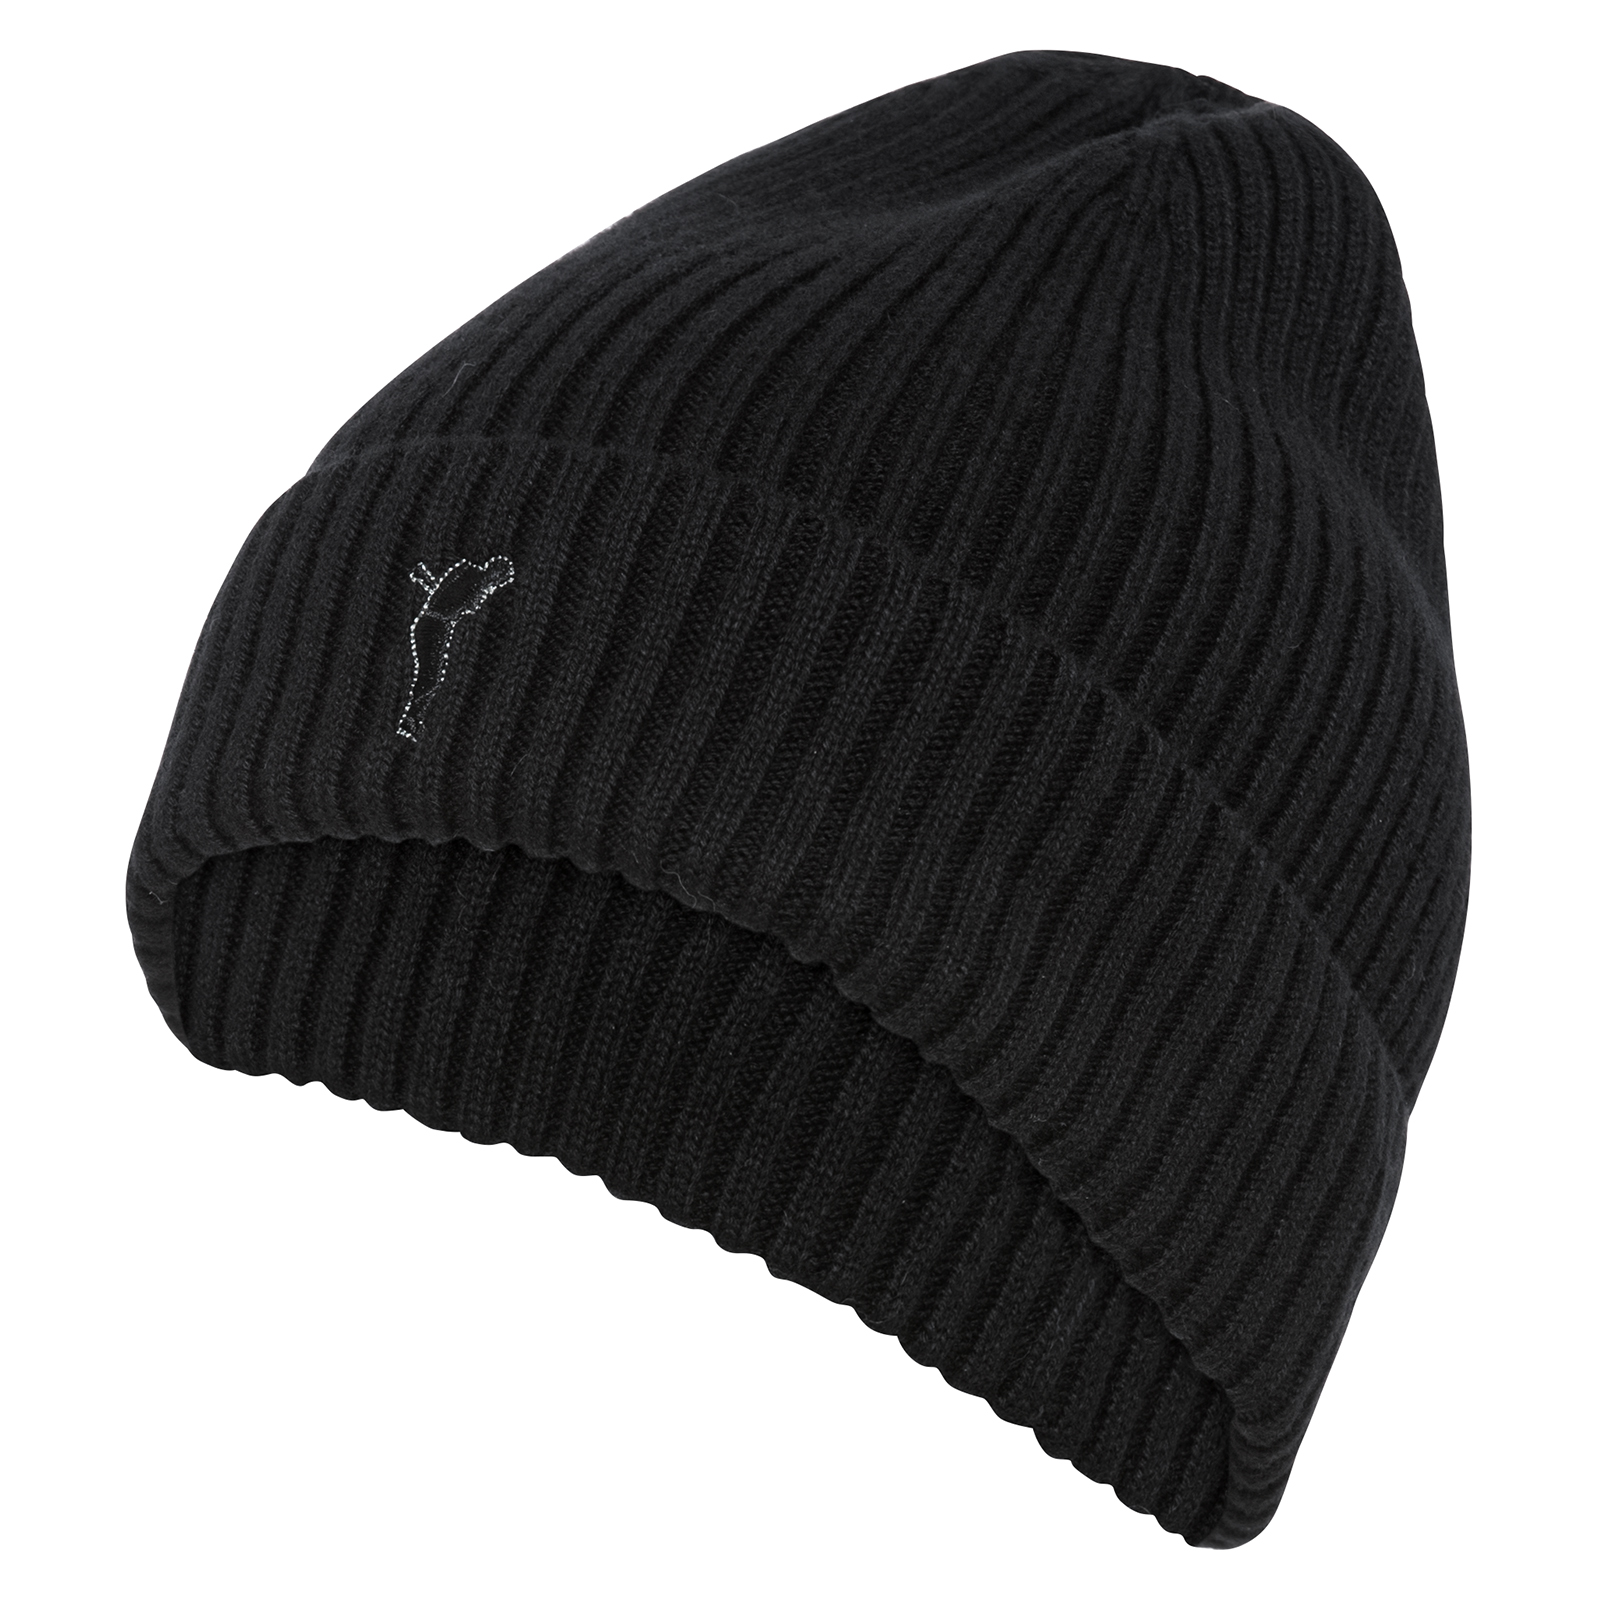 Men's sporty knitted golf hat 